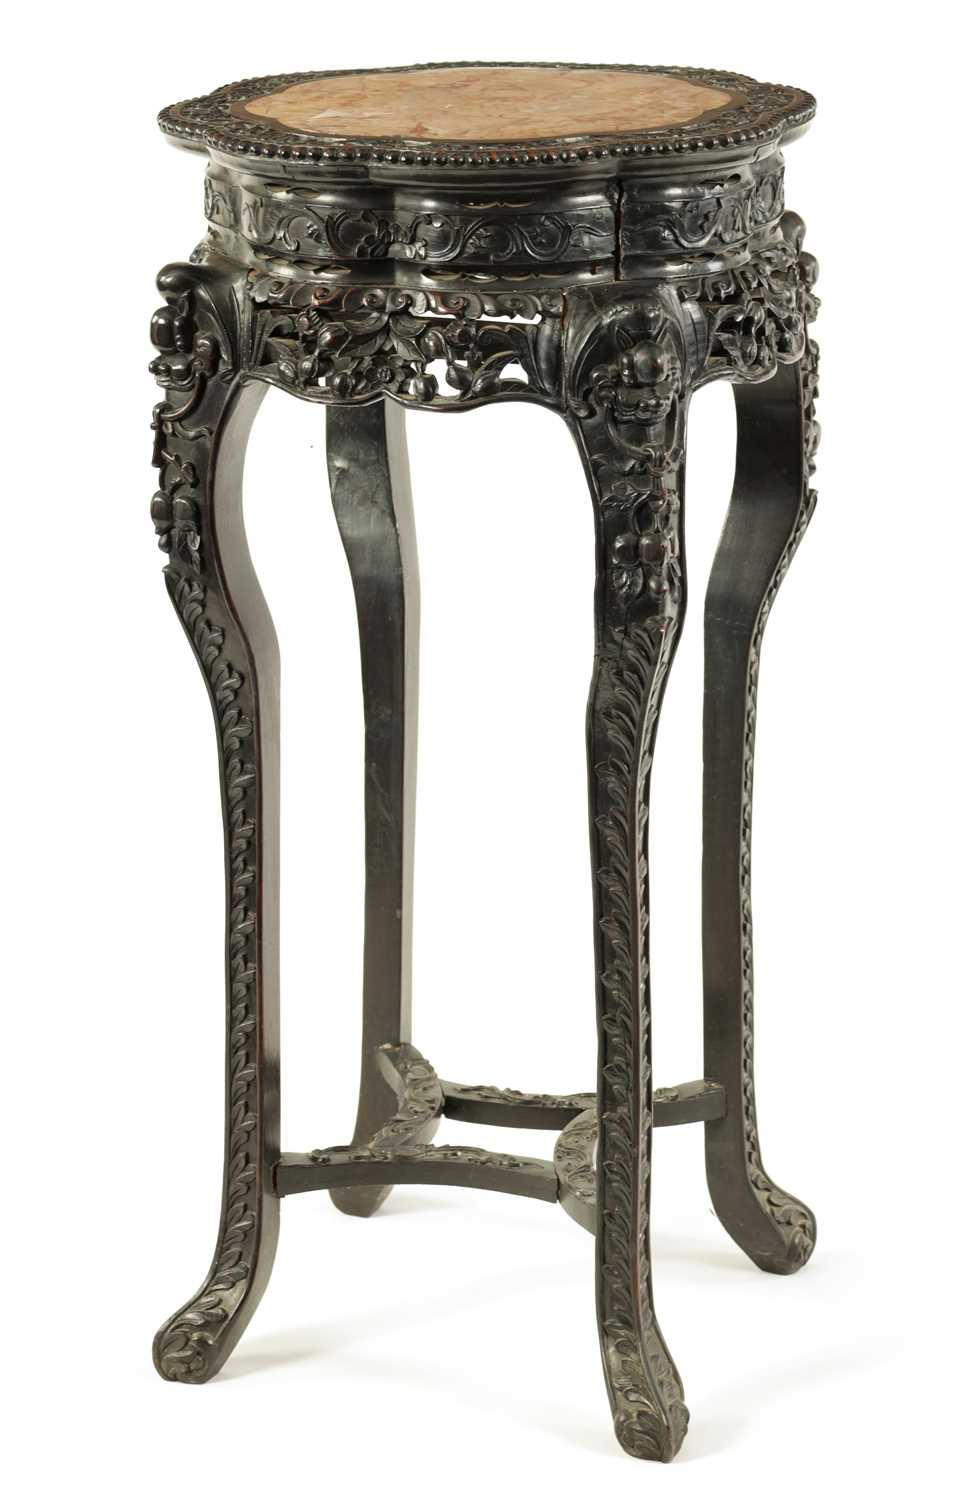 Lot 85 - A 19TH CENTURY CHINESE CARVED HARDWOOD TALL JARDINERE STAND